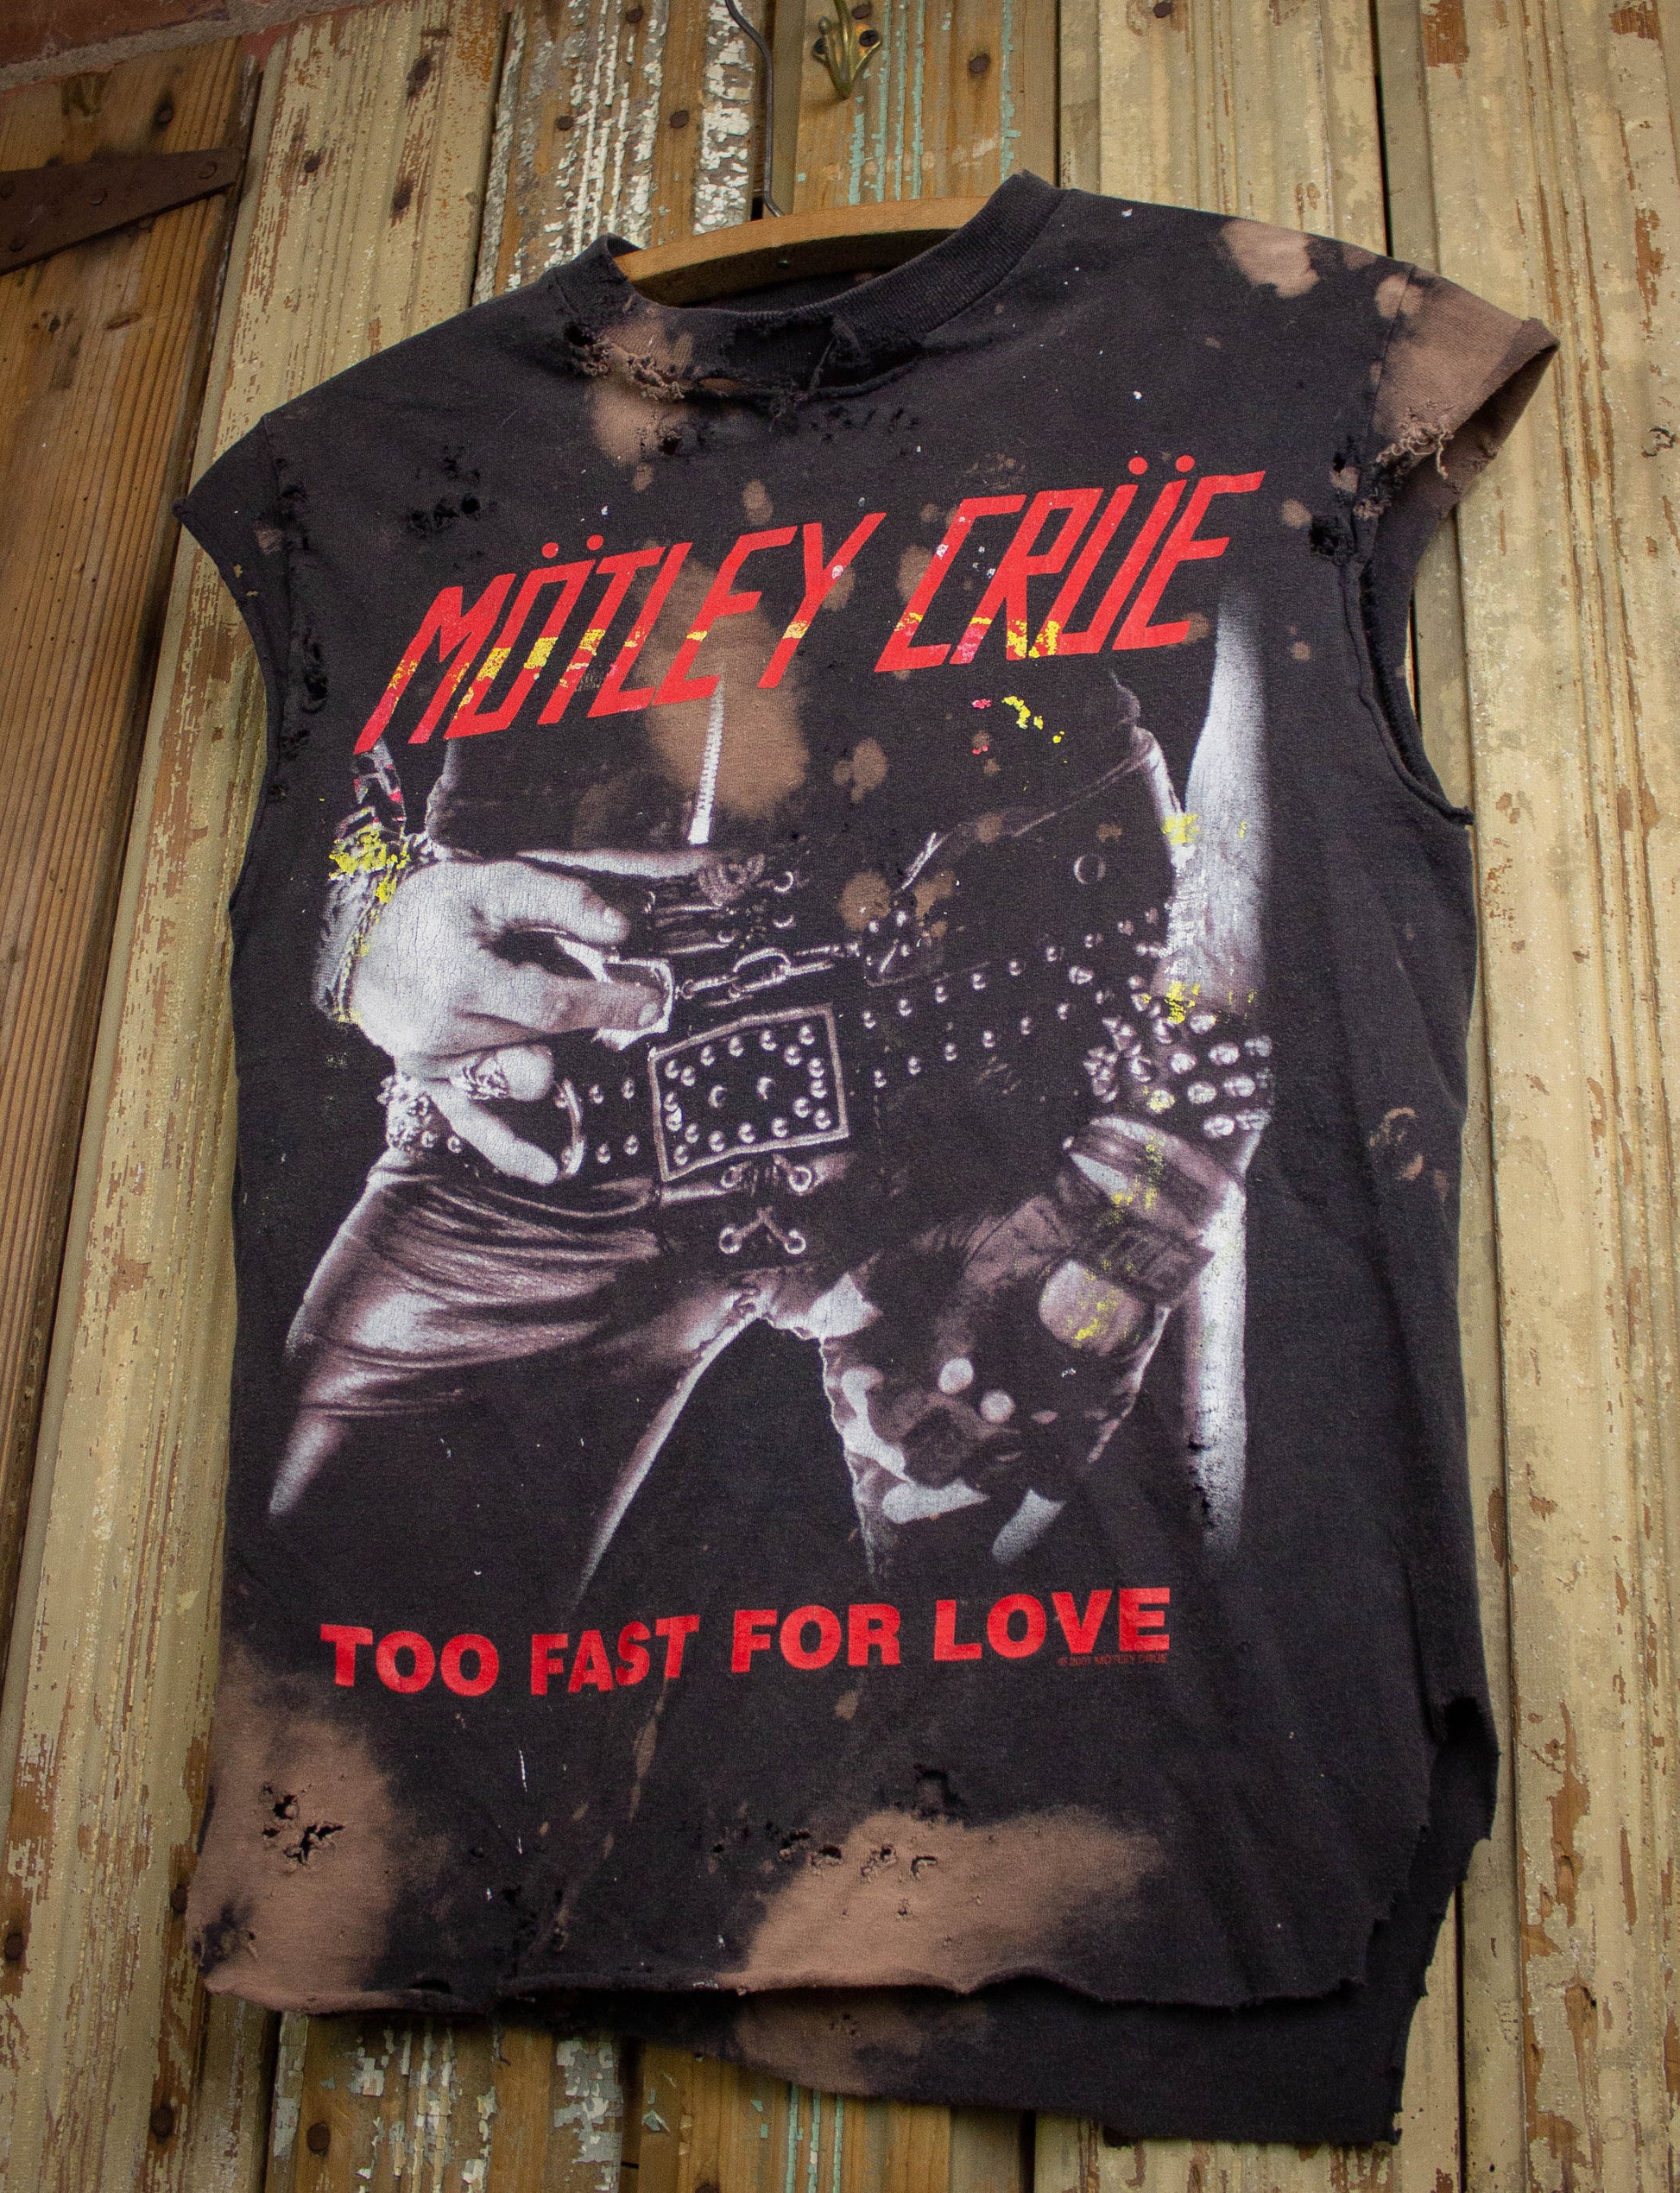 Vintage Motley Crue Too Fast For Love Cutoff Concert T Shirt 2001 by Dead End Career Club Black Small